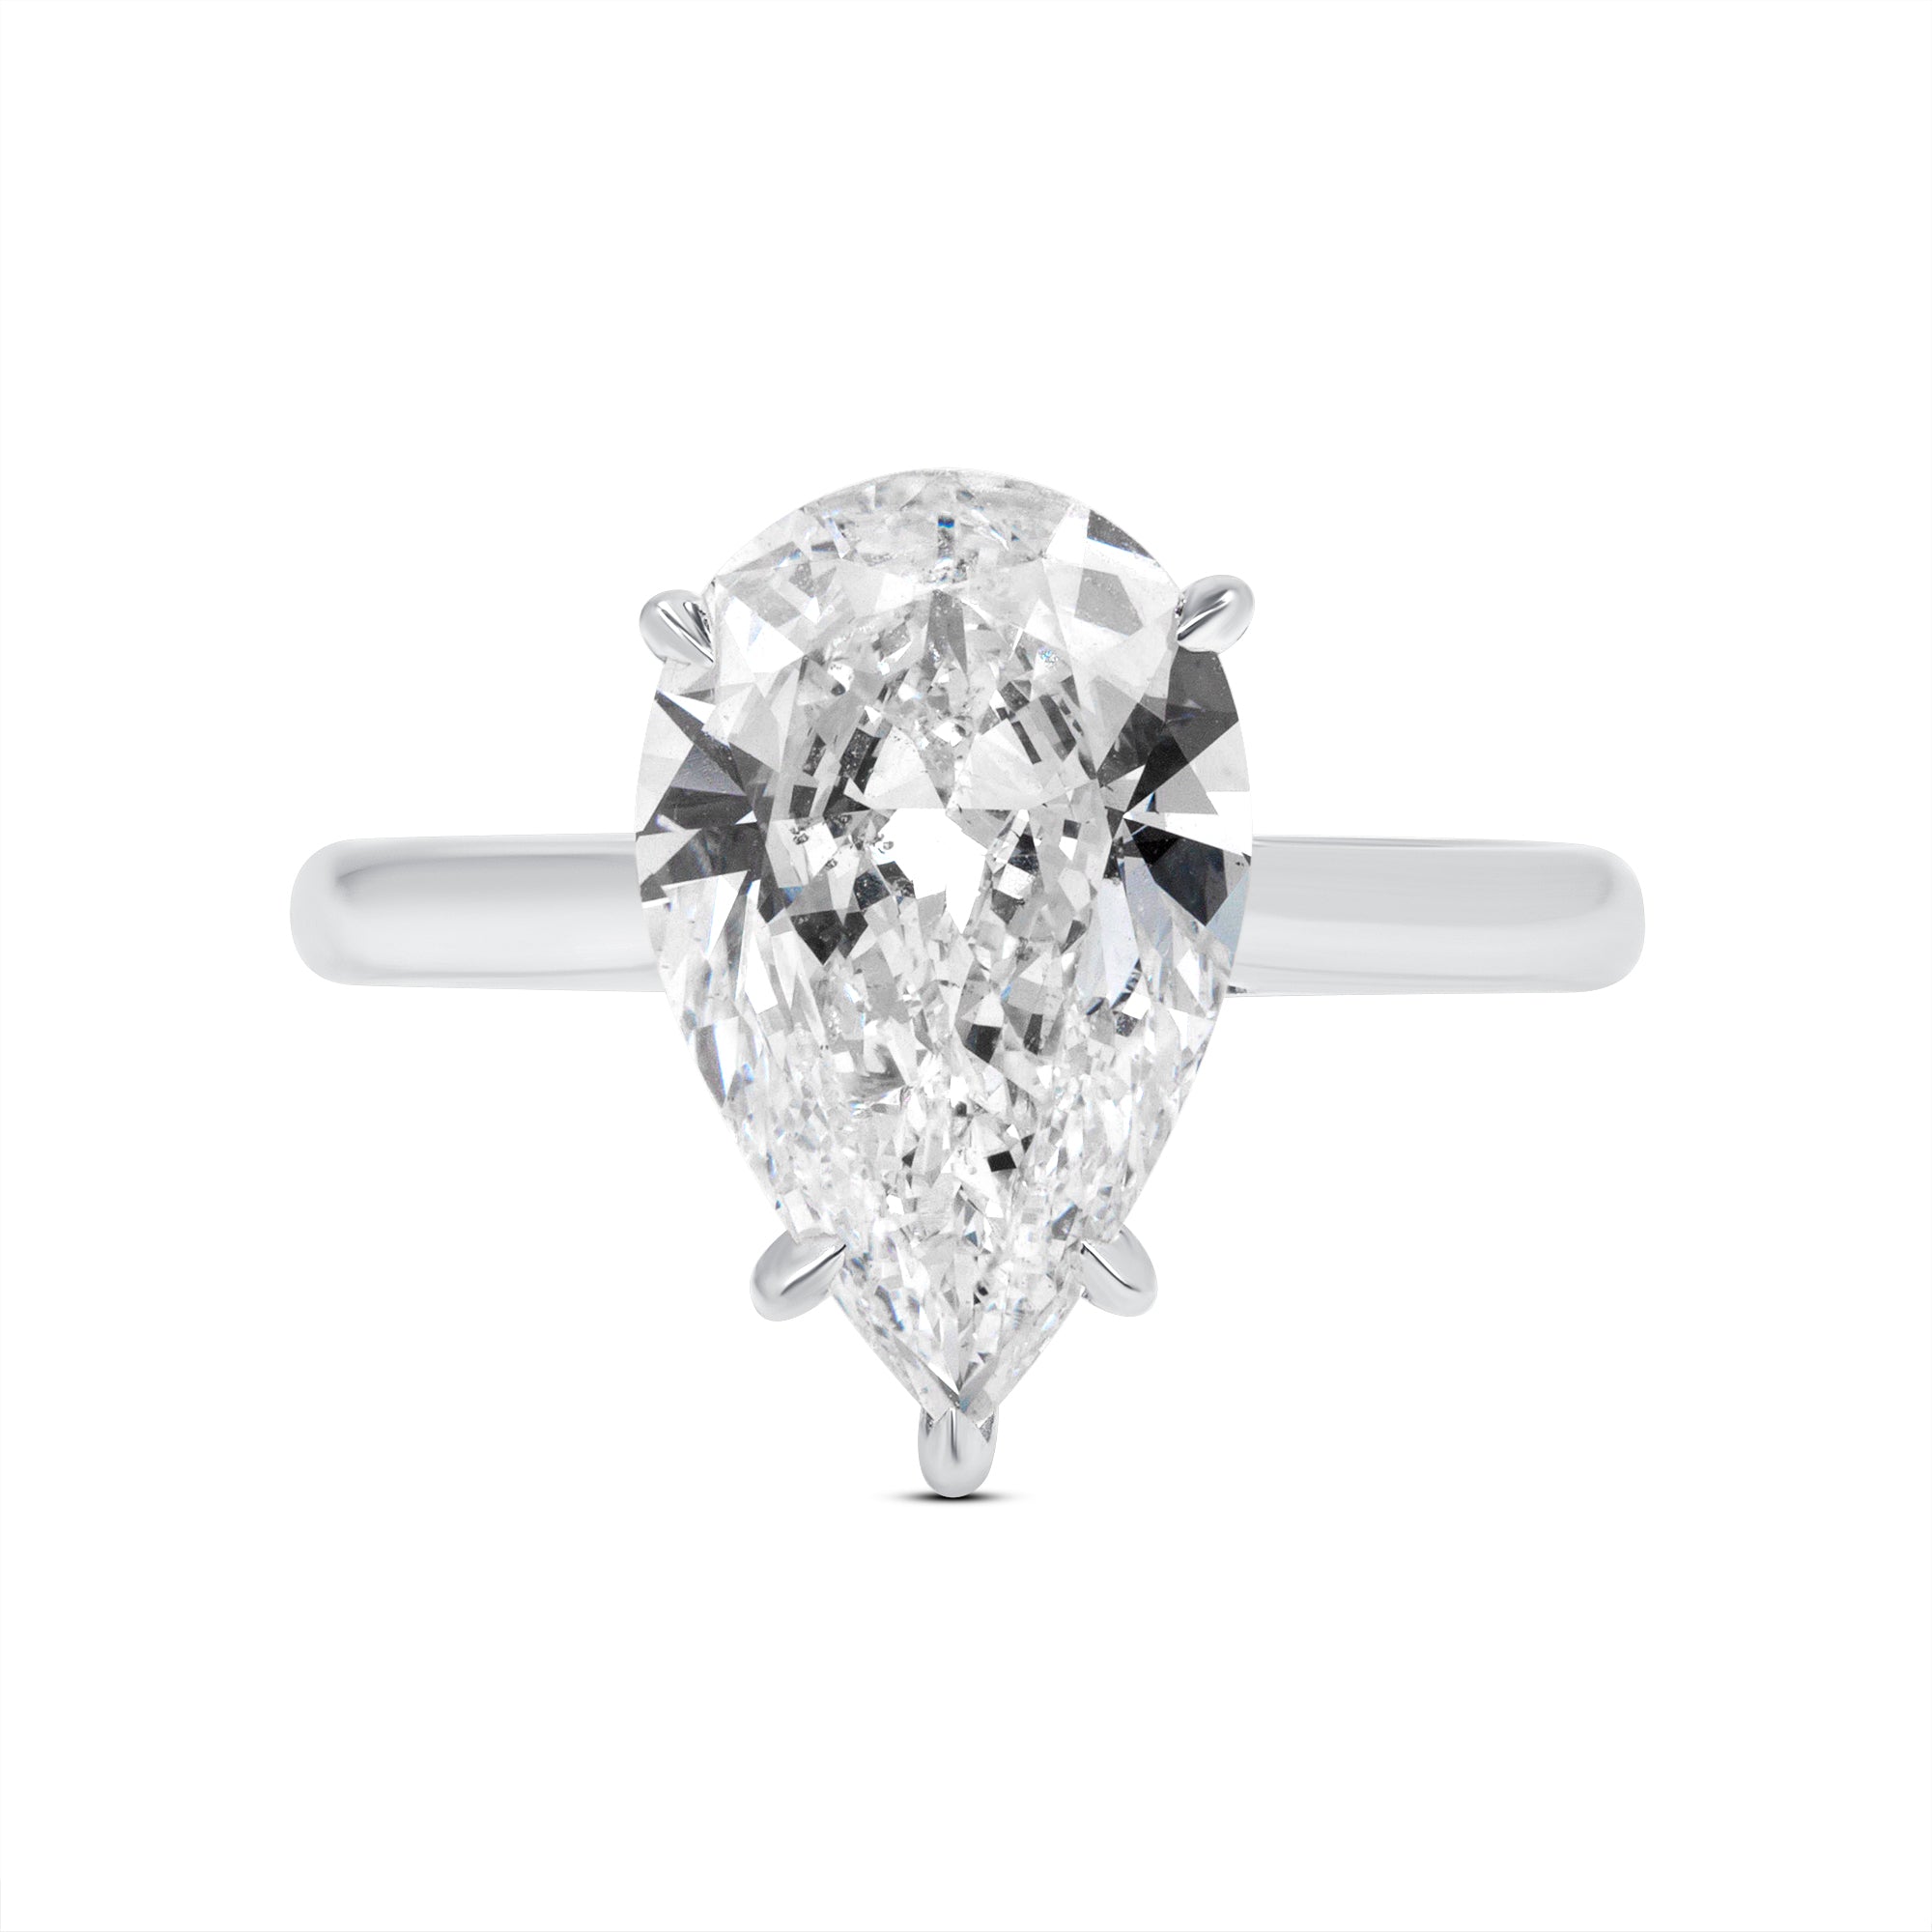 3.15ct Pear Cut Diamond Solitaire Ring in Platinum Band, GIA Certified